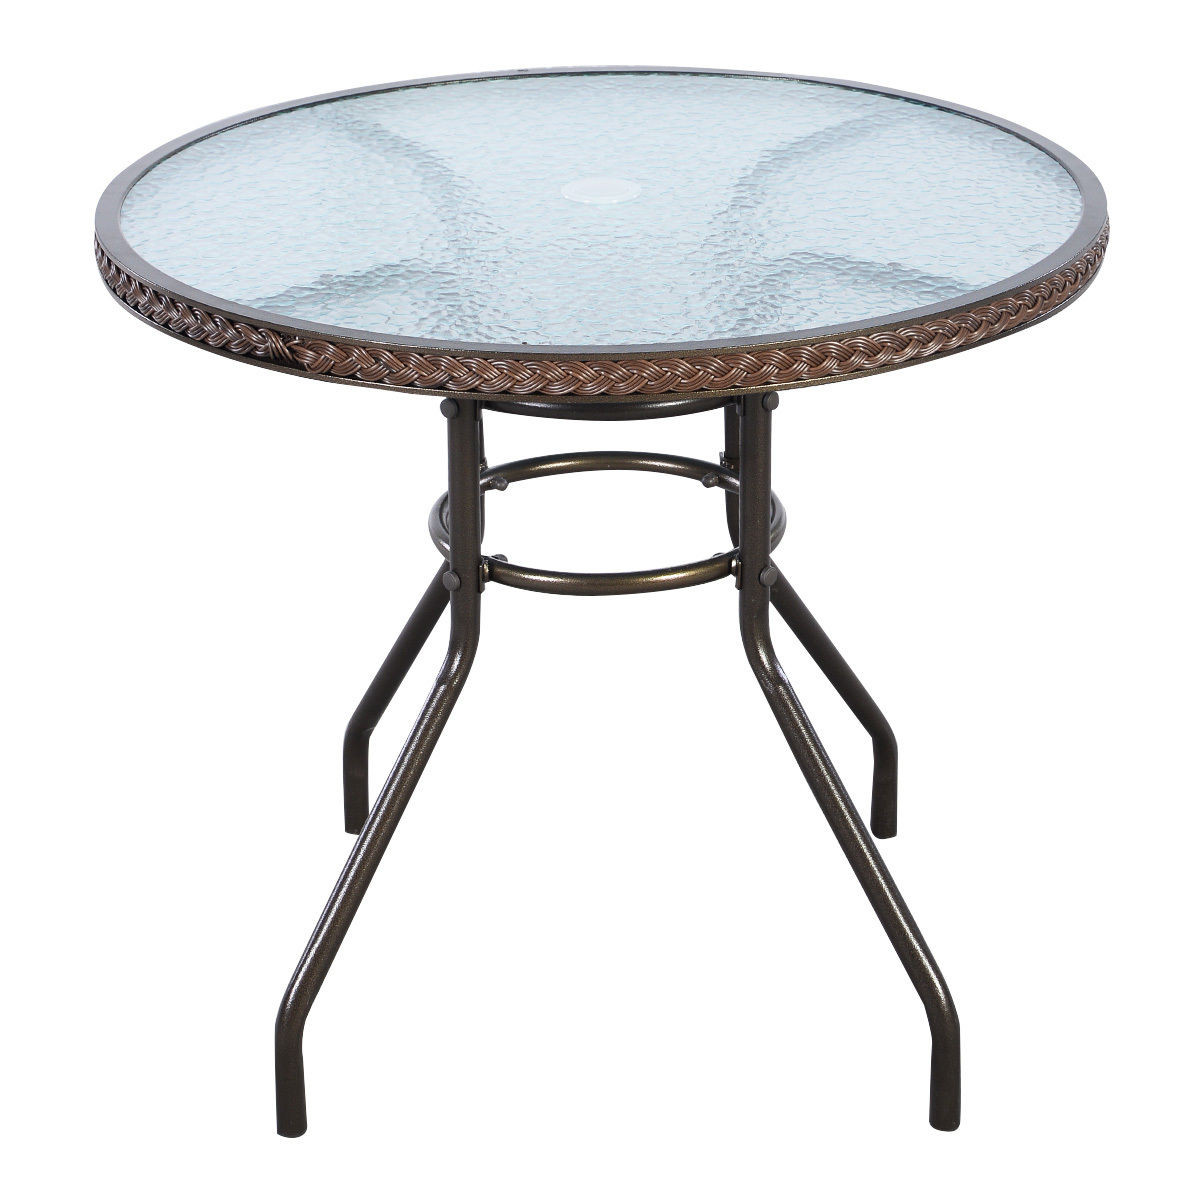 Patio Steel Round Table With Umbrella Holes For Outdoor Costway